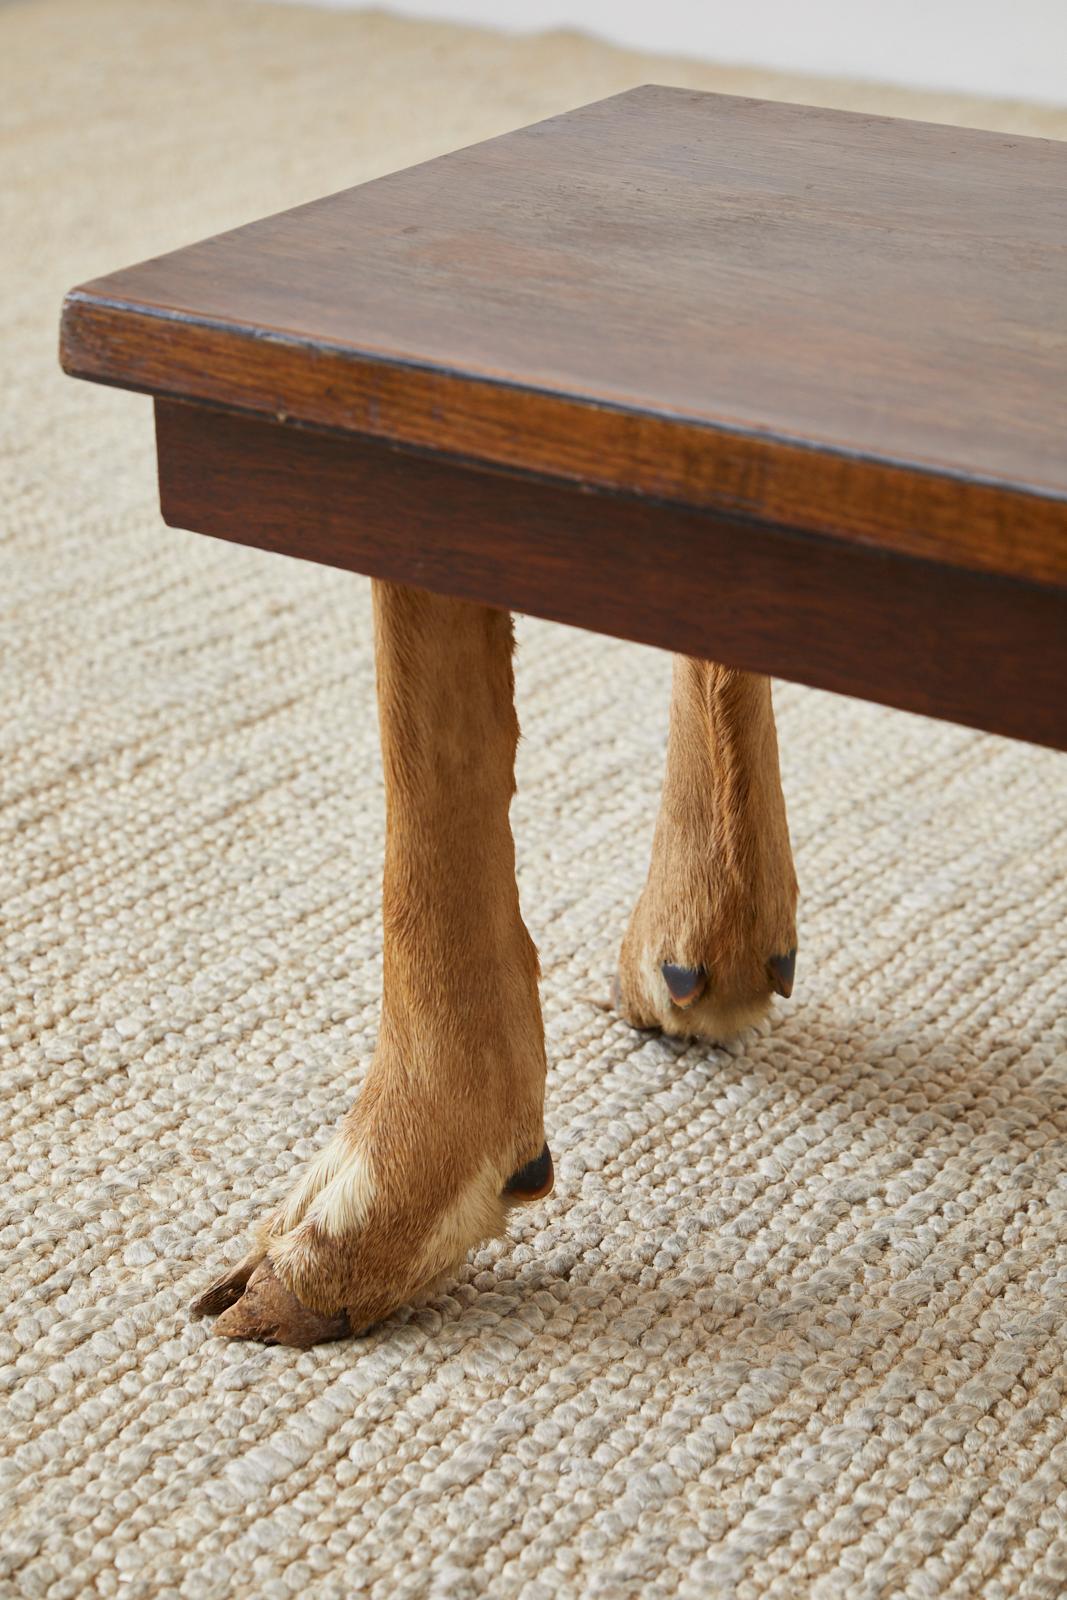 Hand-Crafted Rustic French Taxidermy Deer Leg Stool or Drinks Table